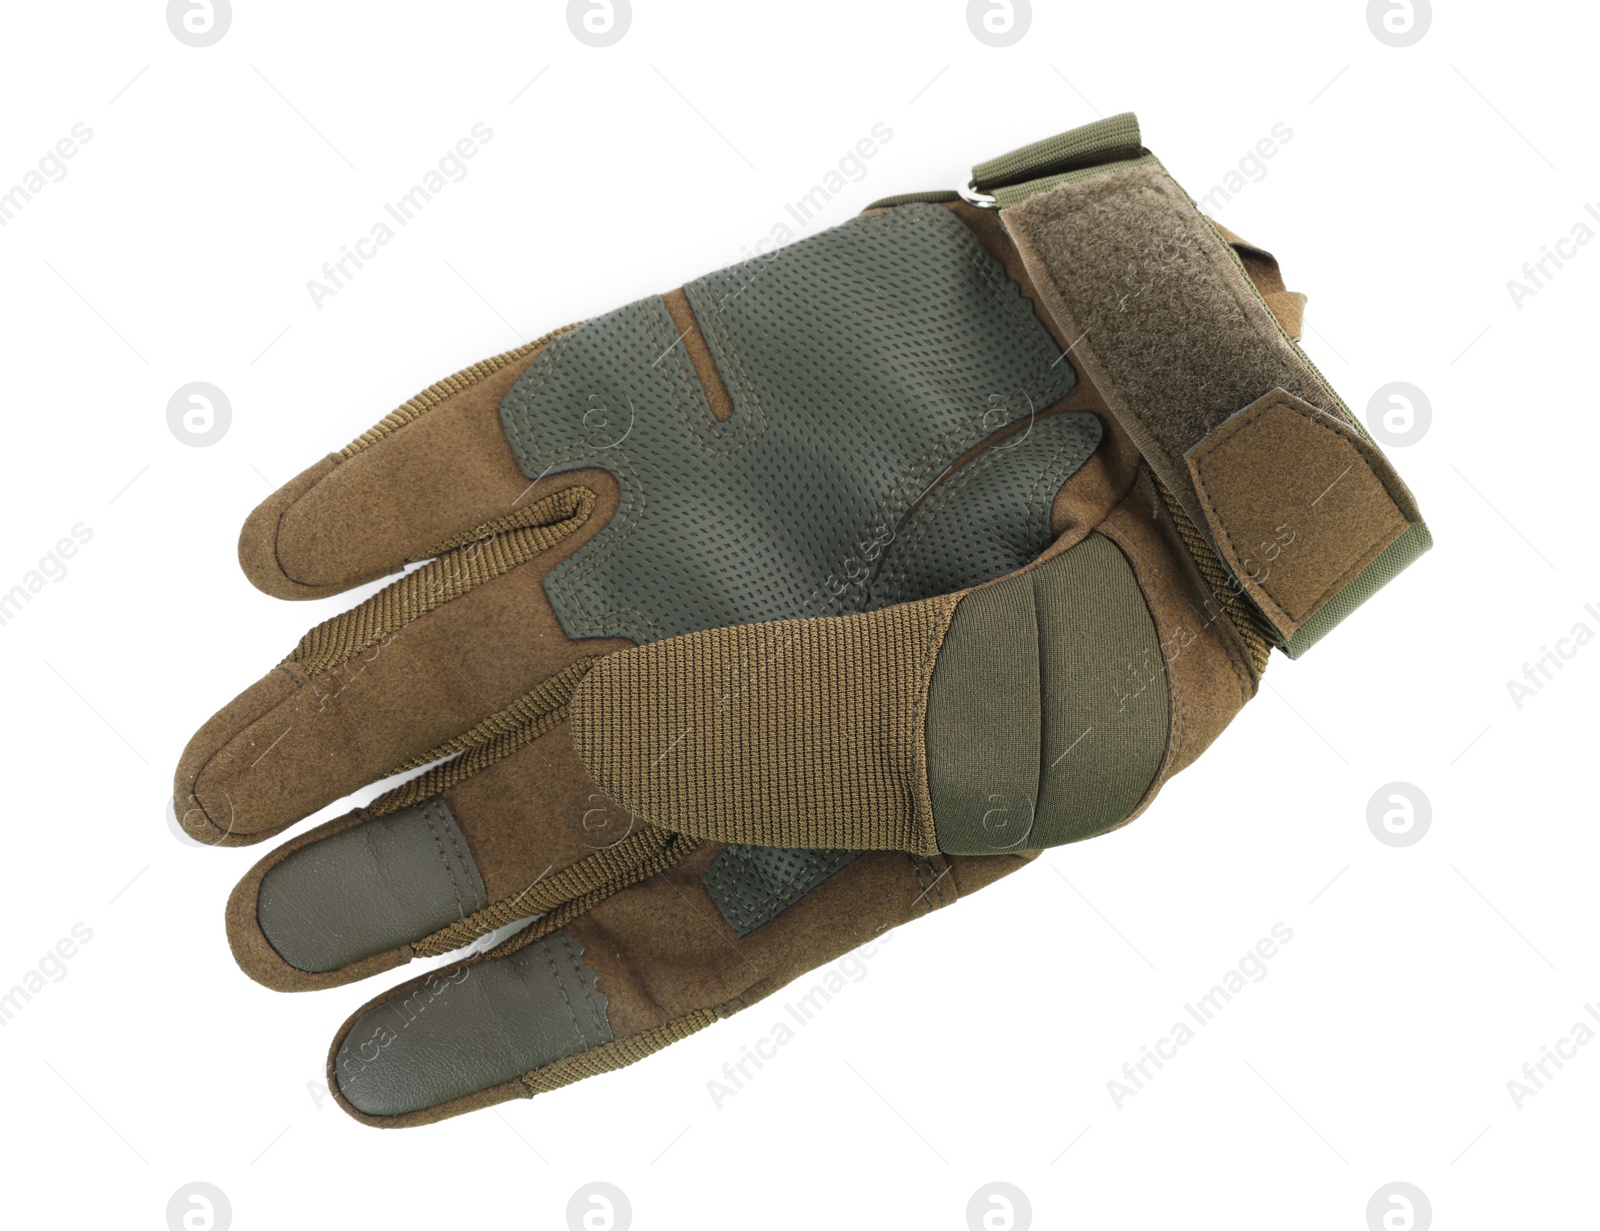 Photo of Tactical glove isolated on white, top view. Military training equipment